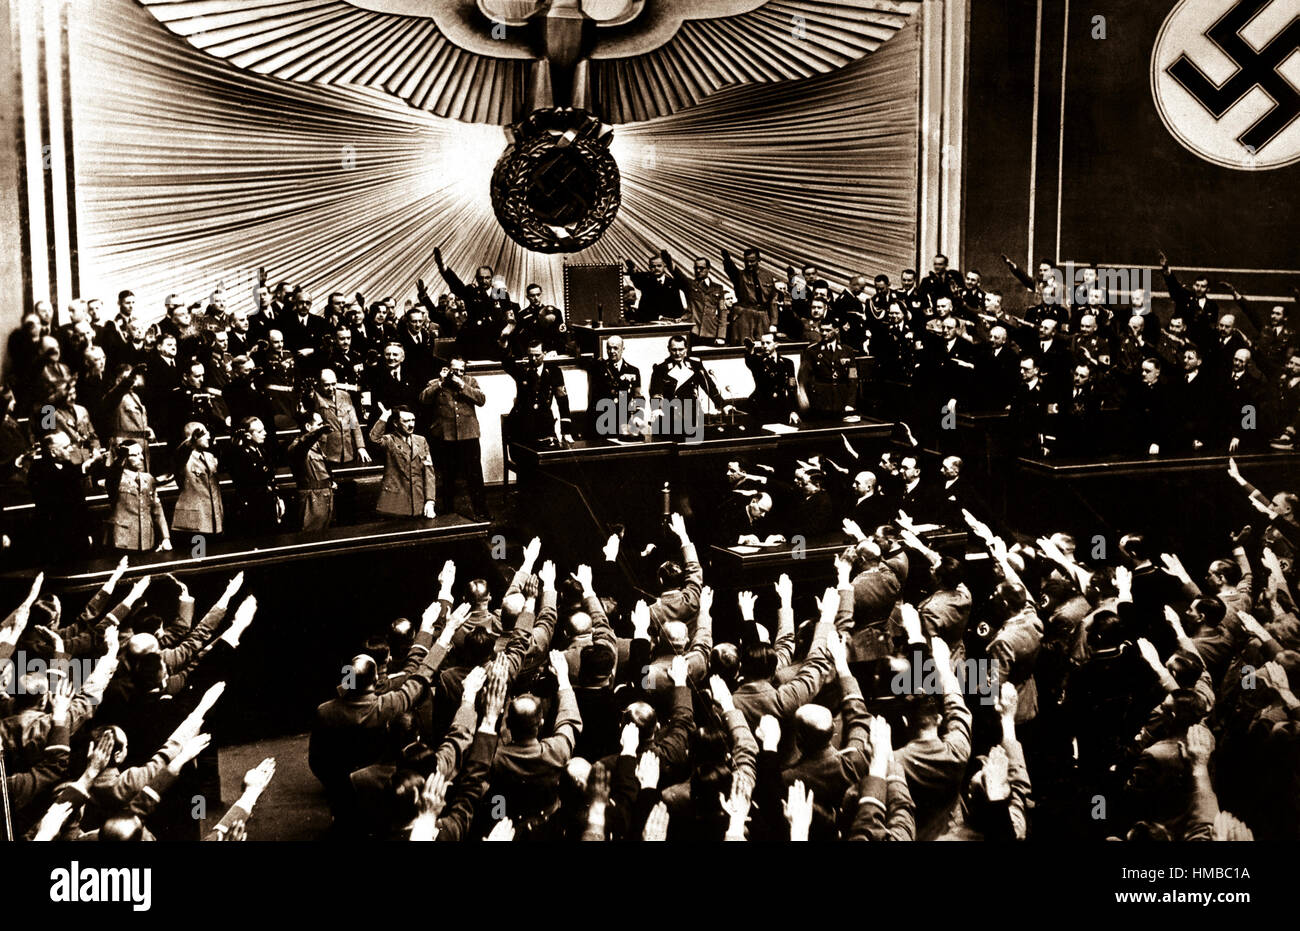 Hitler accepts the ovation of the Reichstag after announcing the 'peaceful' acquisition of Austria.  It set the stage to annex the Czechoslovakian Sudetenland, largely inhabited by a German-speaking population.  Berlin, March 1938.  (OWI) Exact Date Shot Unknown NARA FILE #:  208-N-39843 WAR & CONFLICT BOOK #:  988 Stock Photo